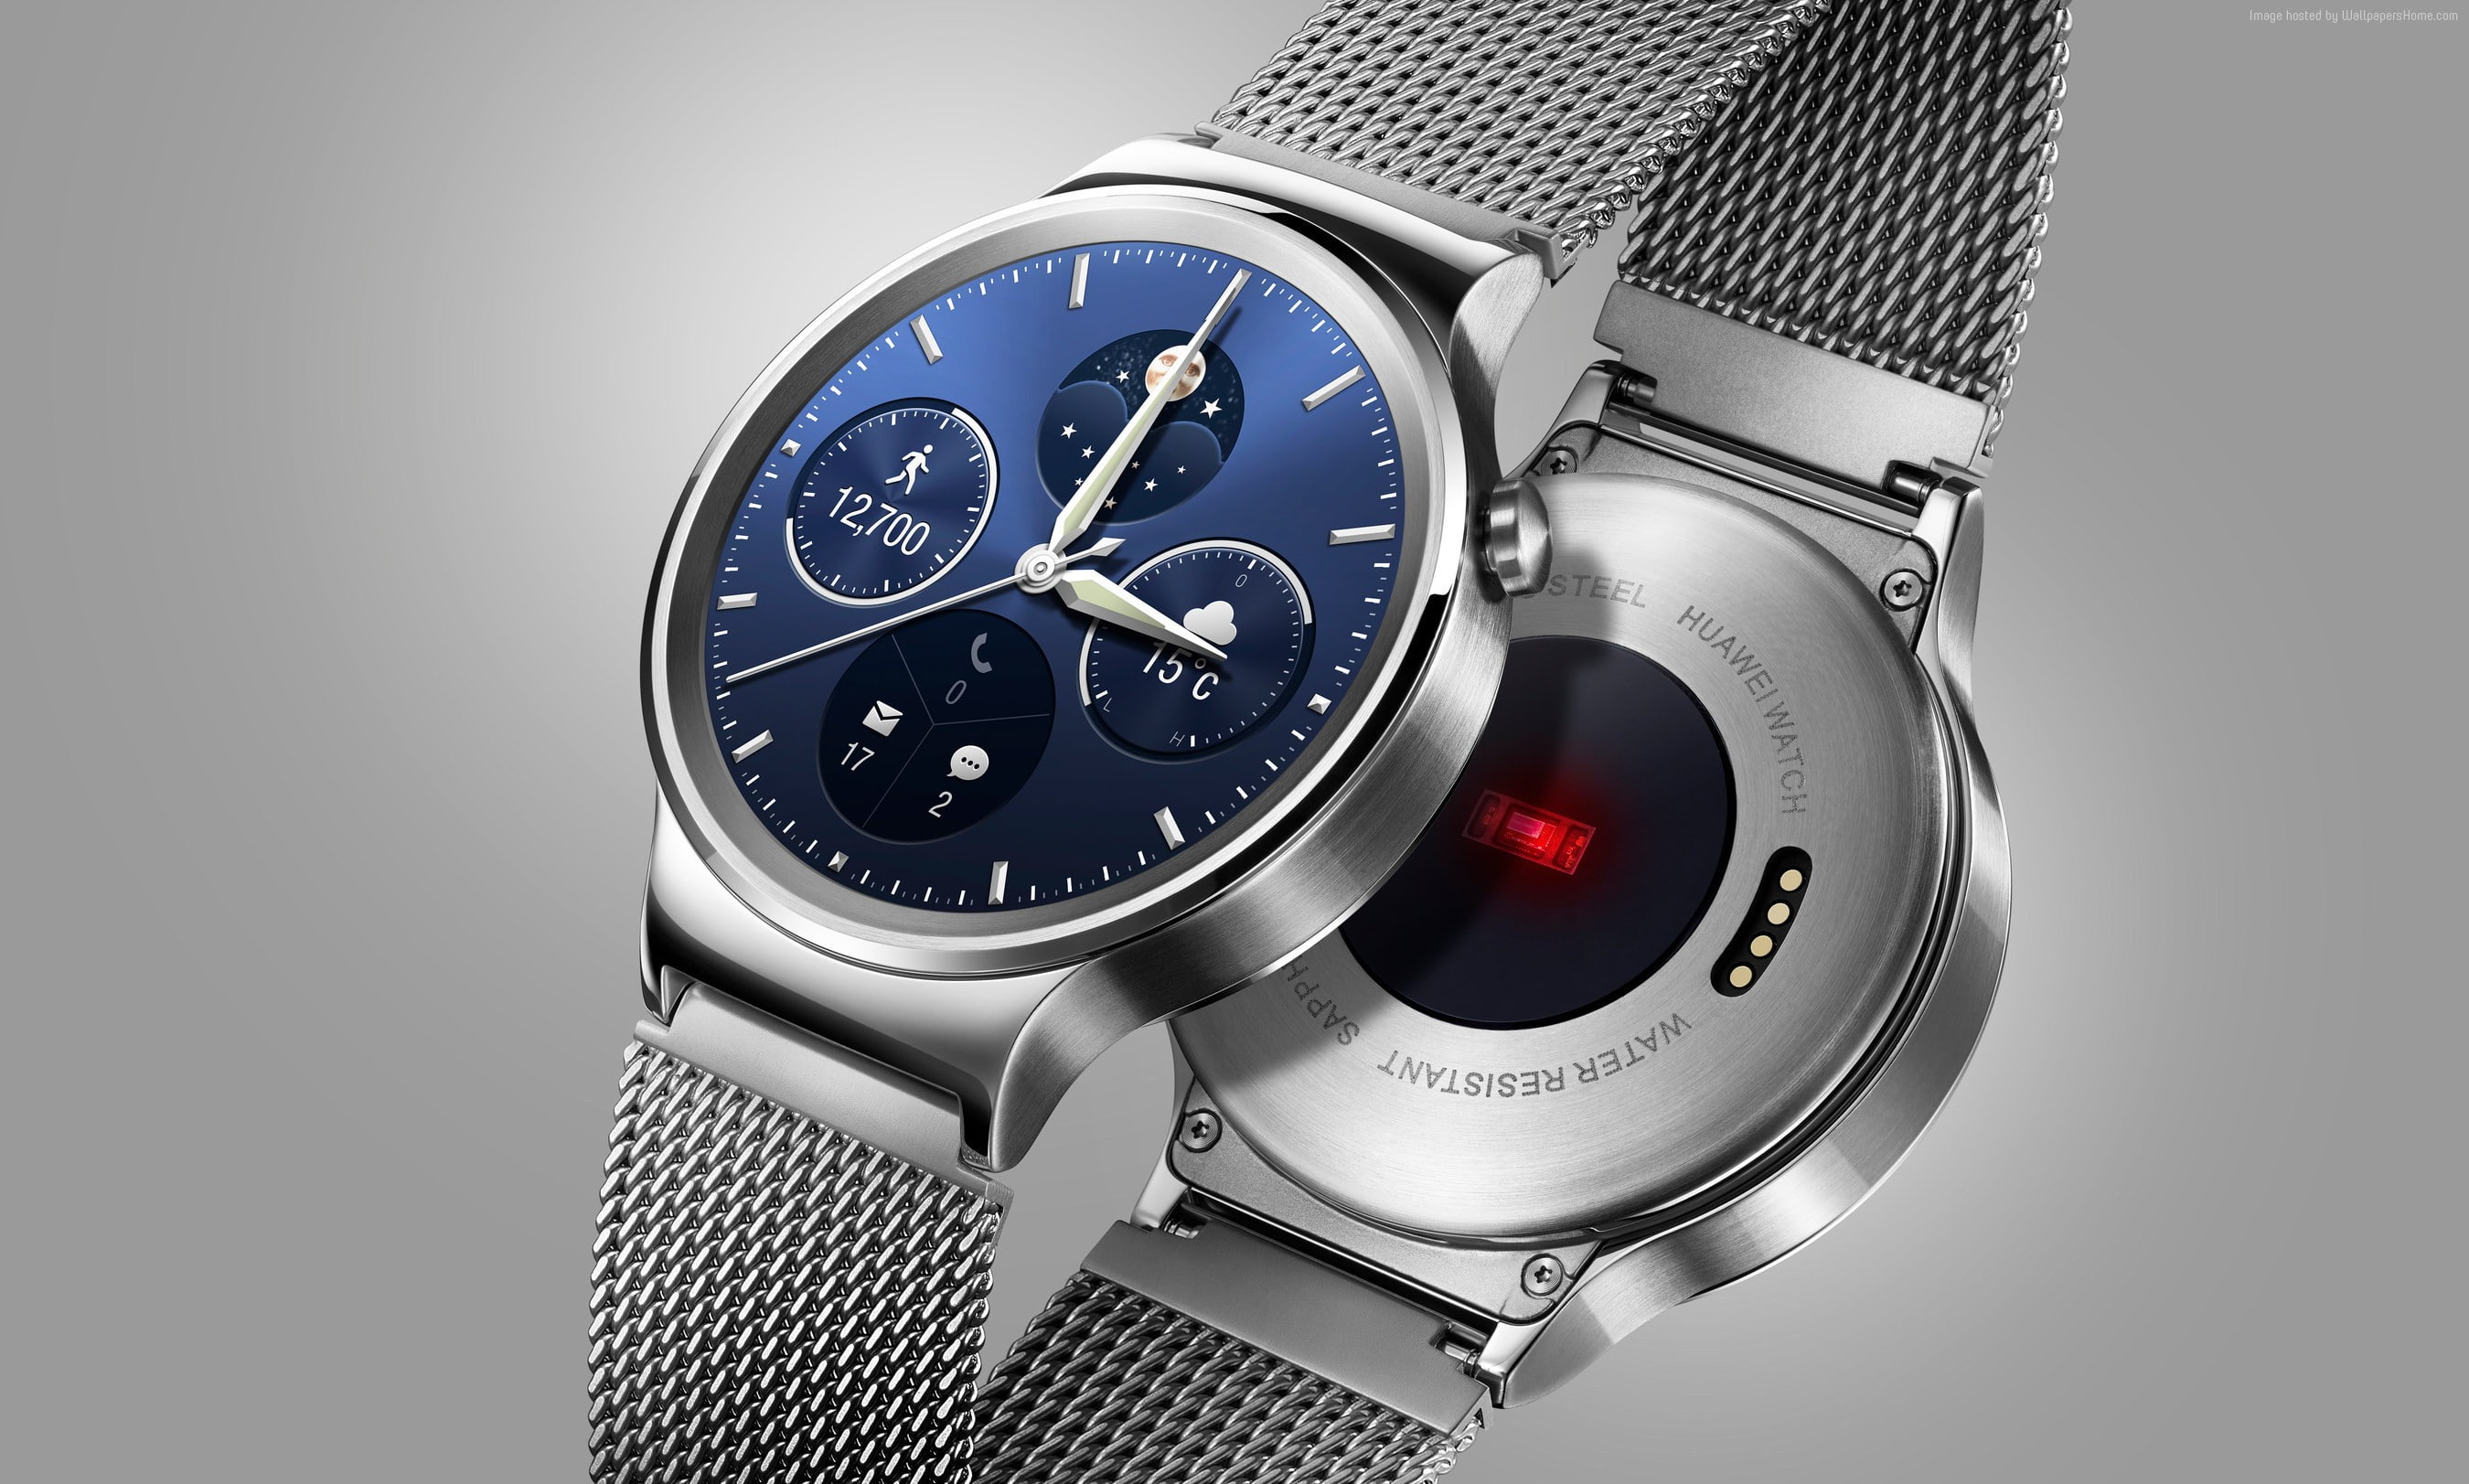 Huawei Watch 2, MWC 2017, best smartwatches, silver colored